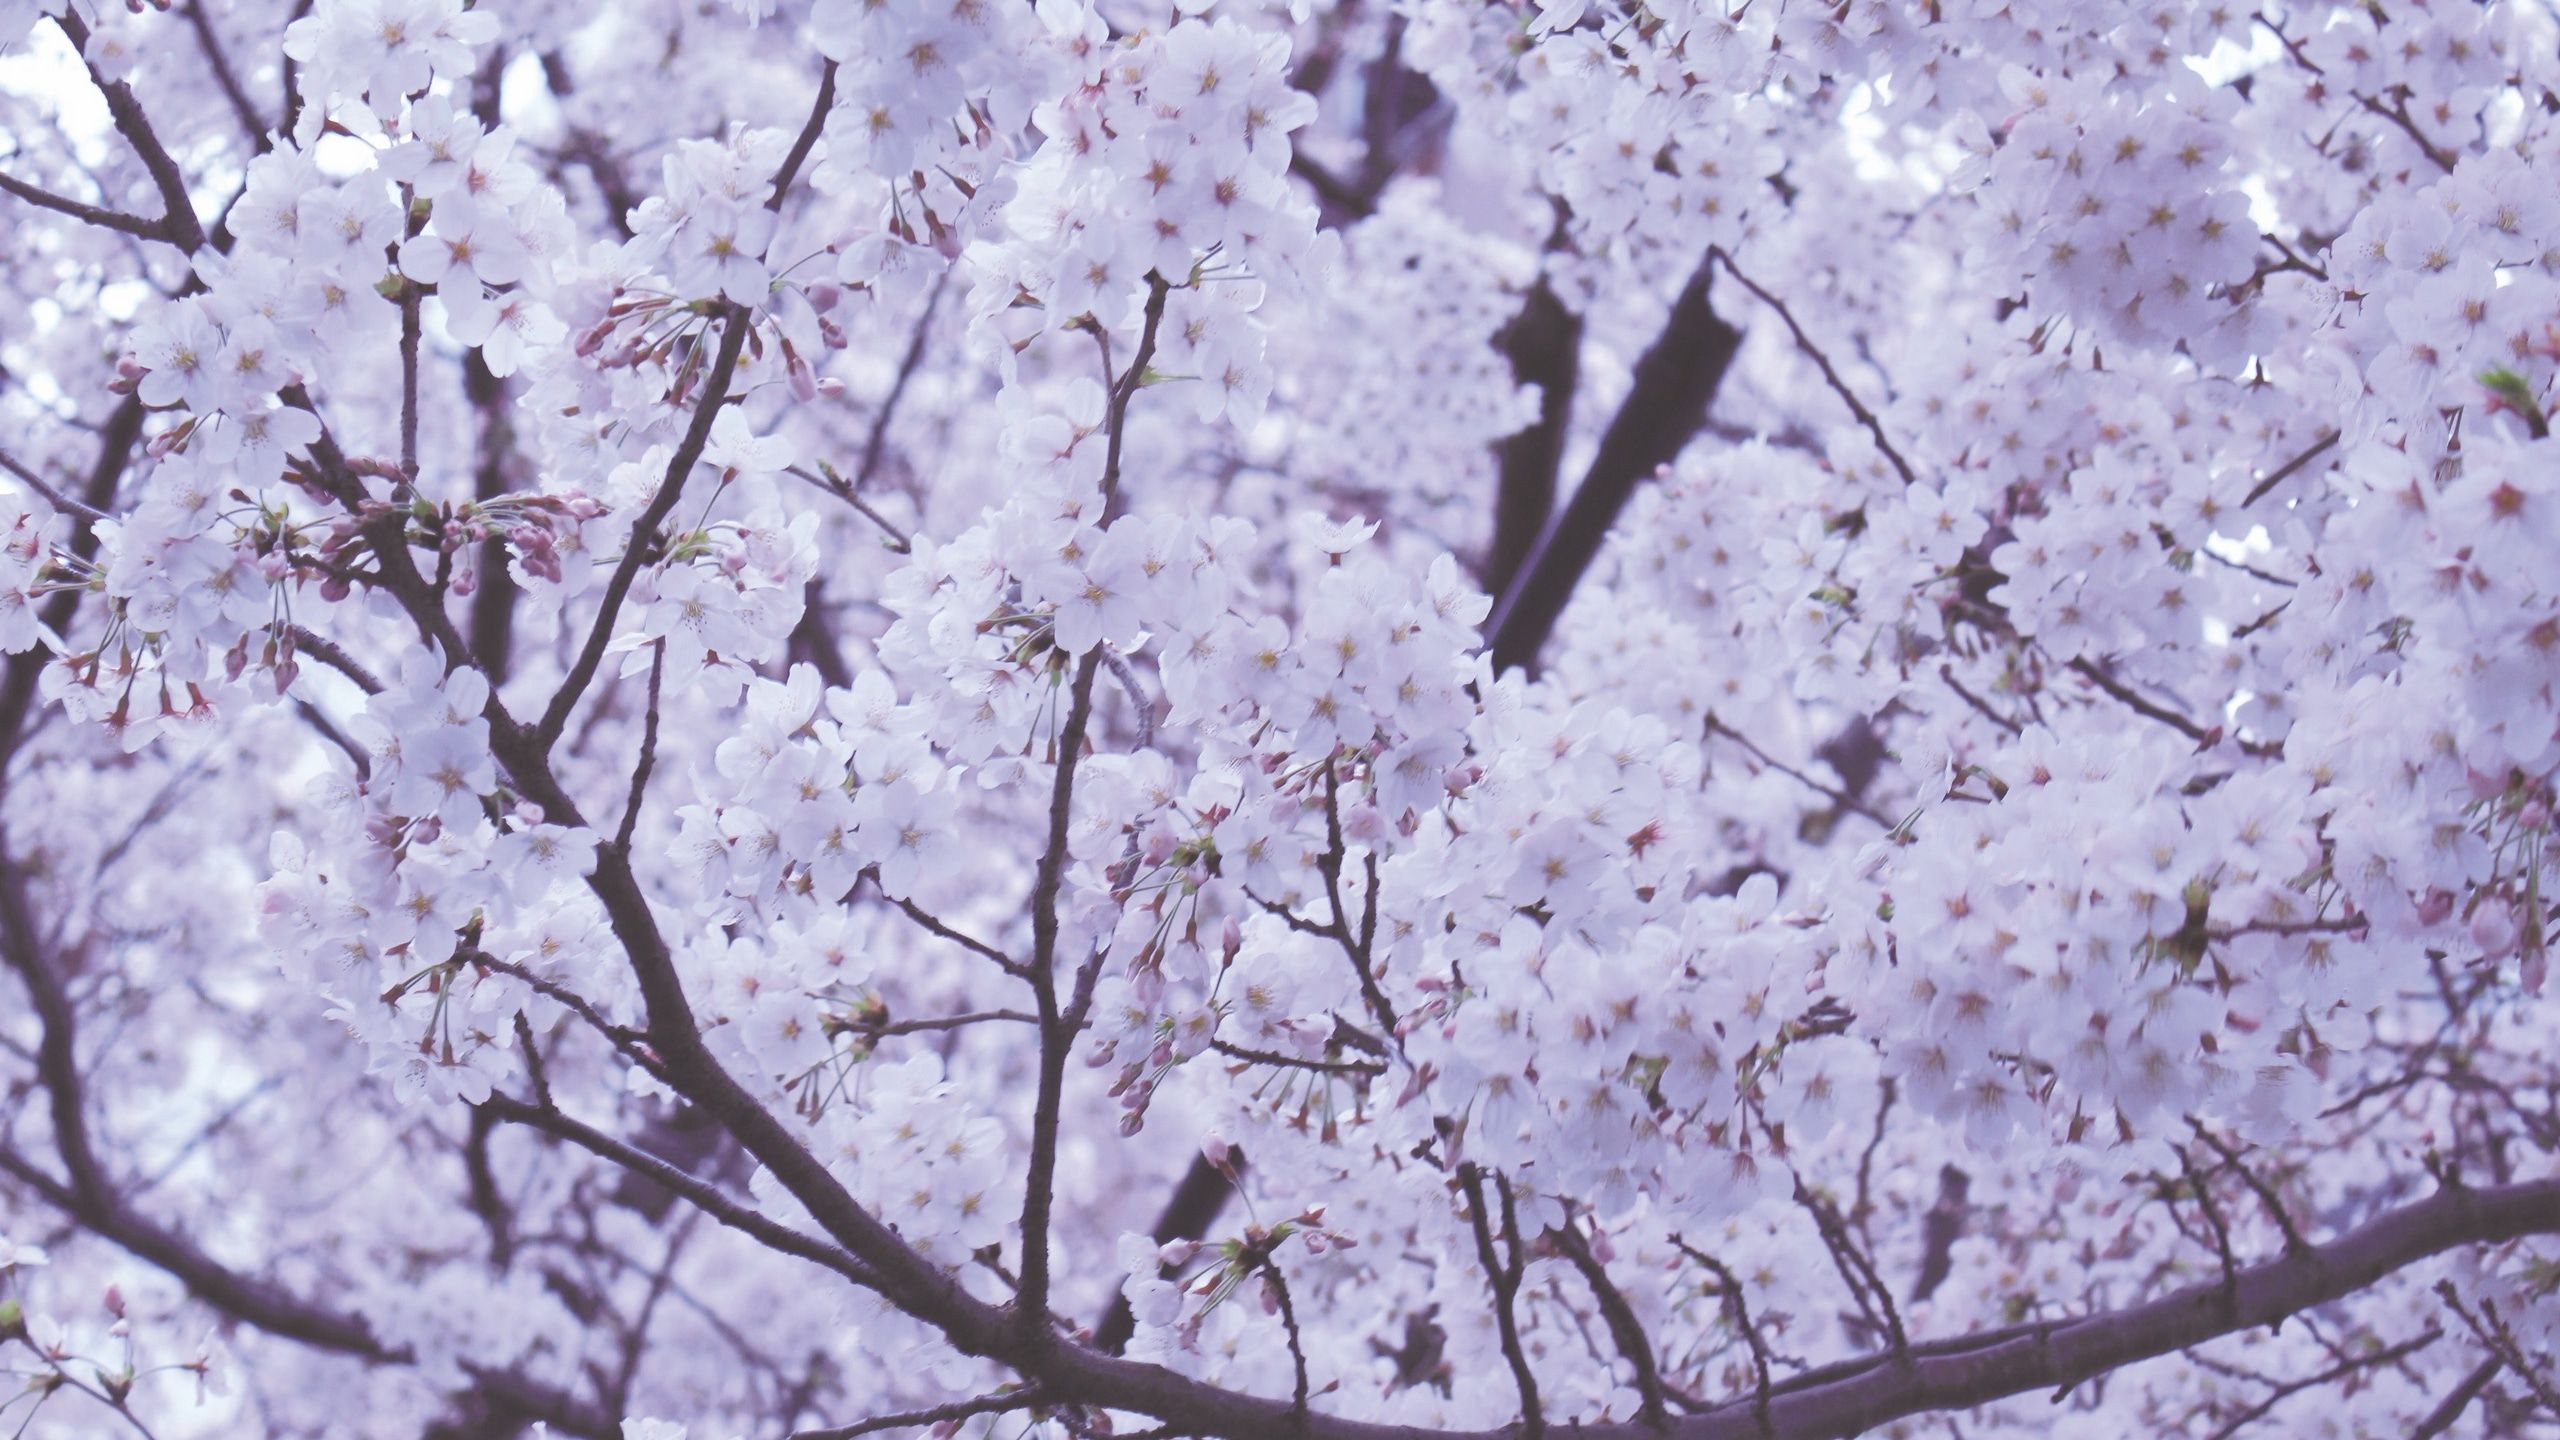 Wallpaper / thick pink white cherry blossom on tree branches in spring in japan, cherry blossom japan 4k wallpaper free download